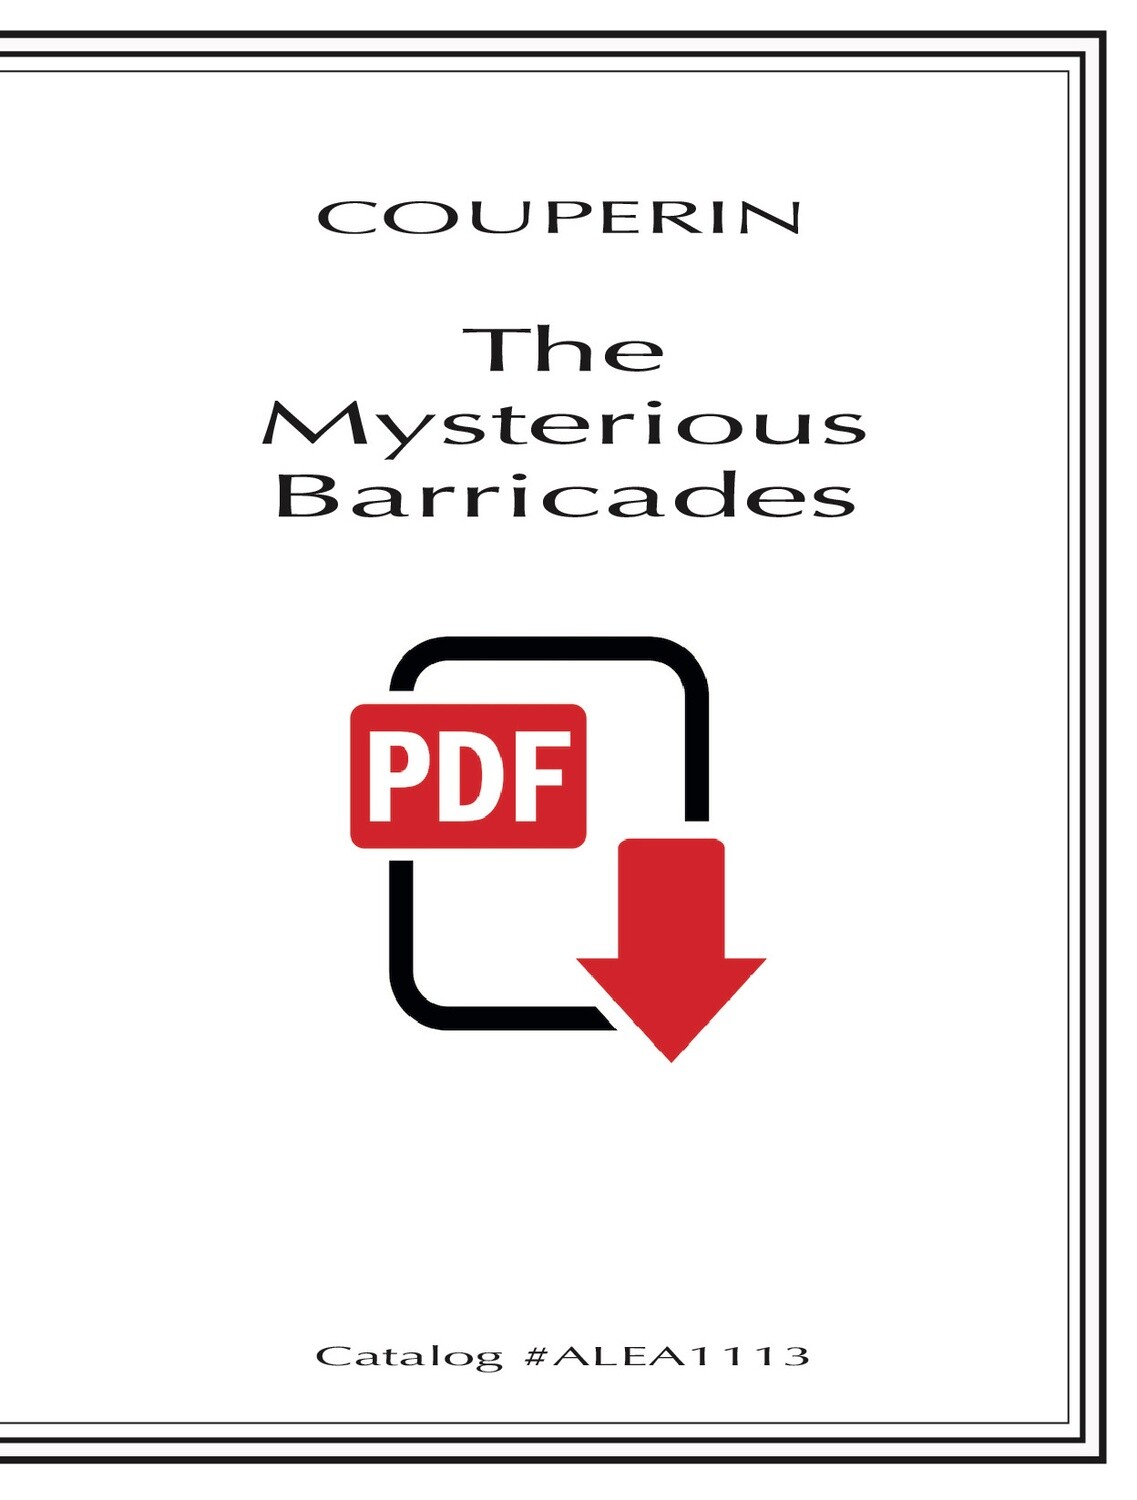 Couperin: The Mysterious Barricades (PDF)